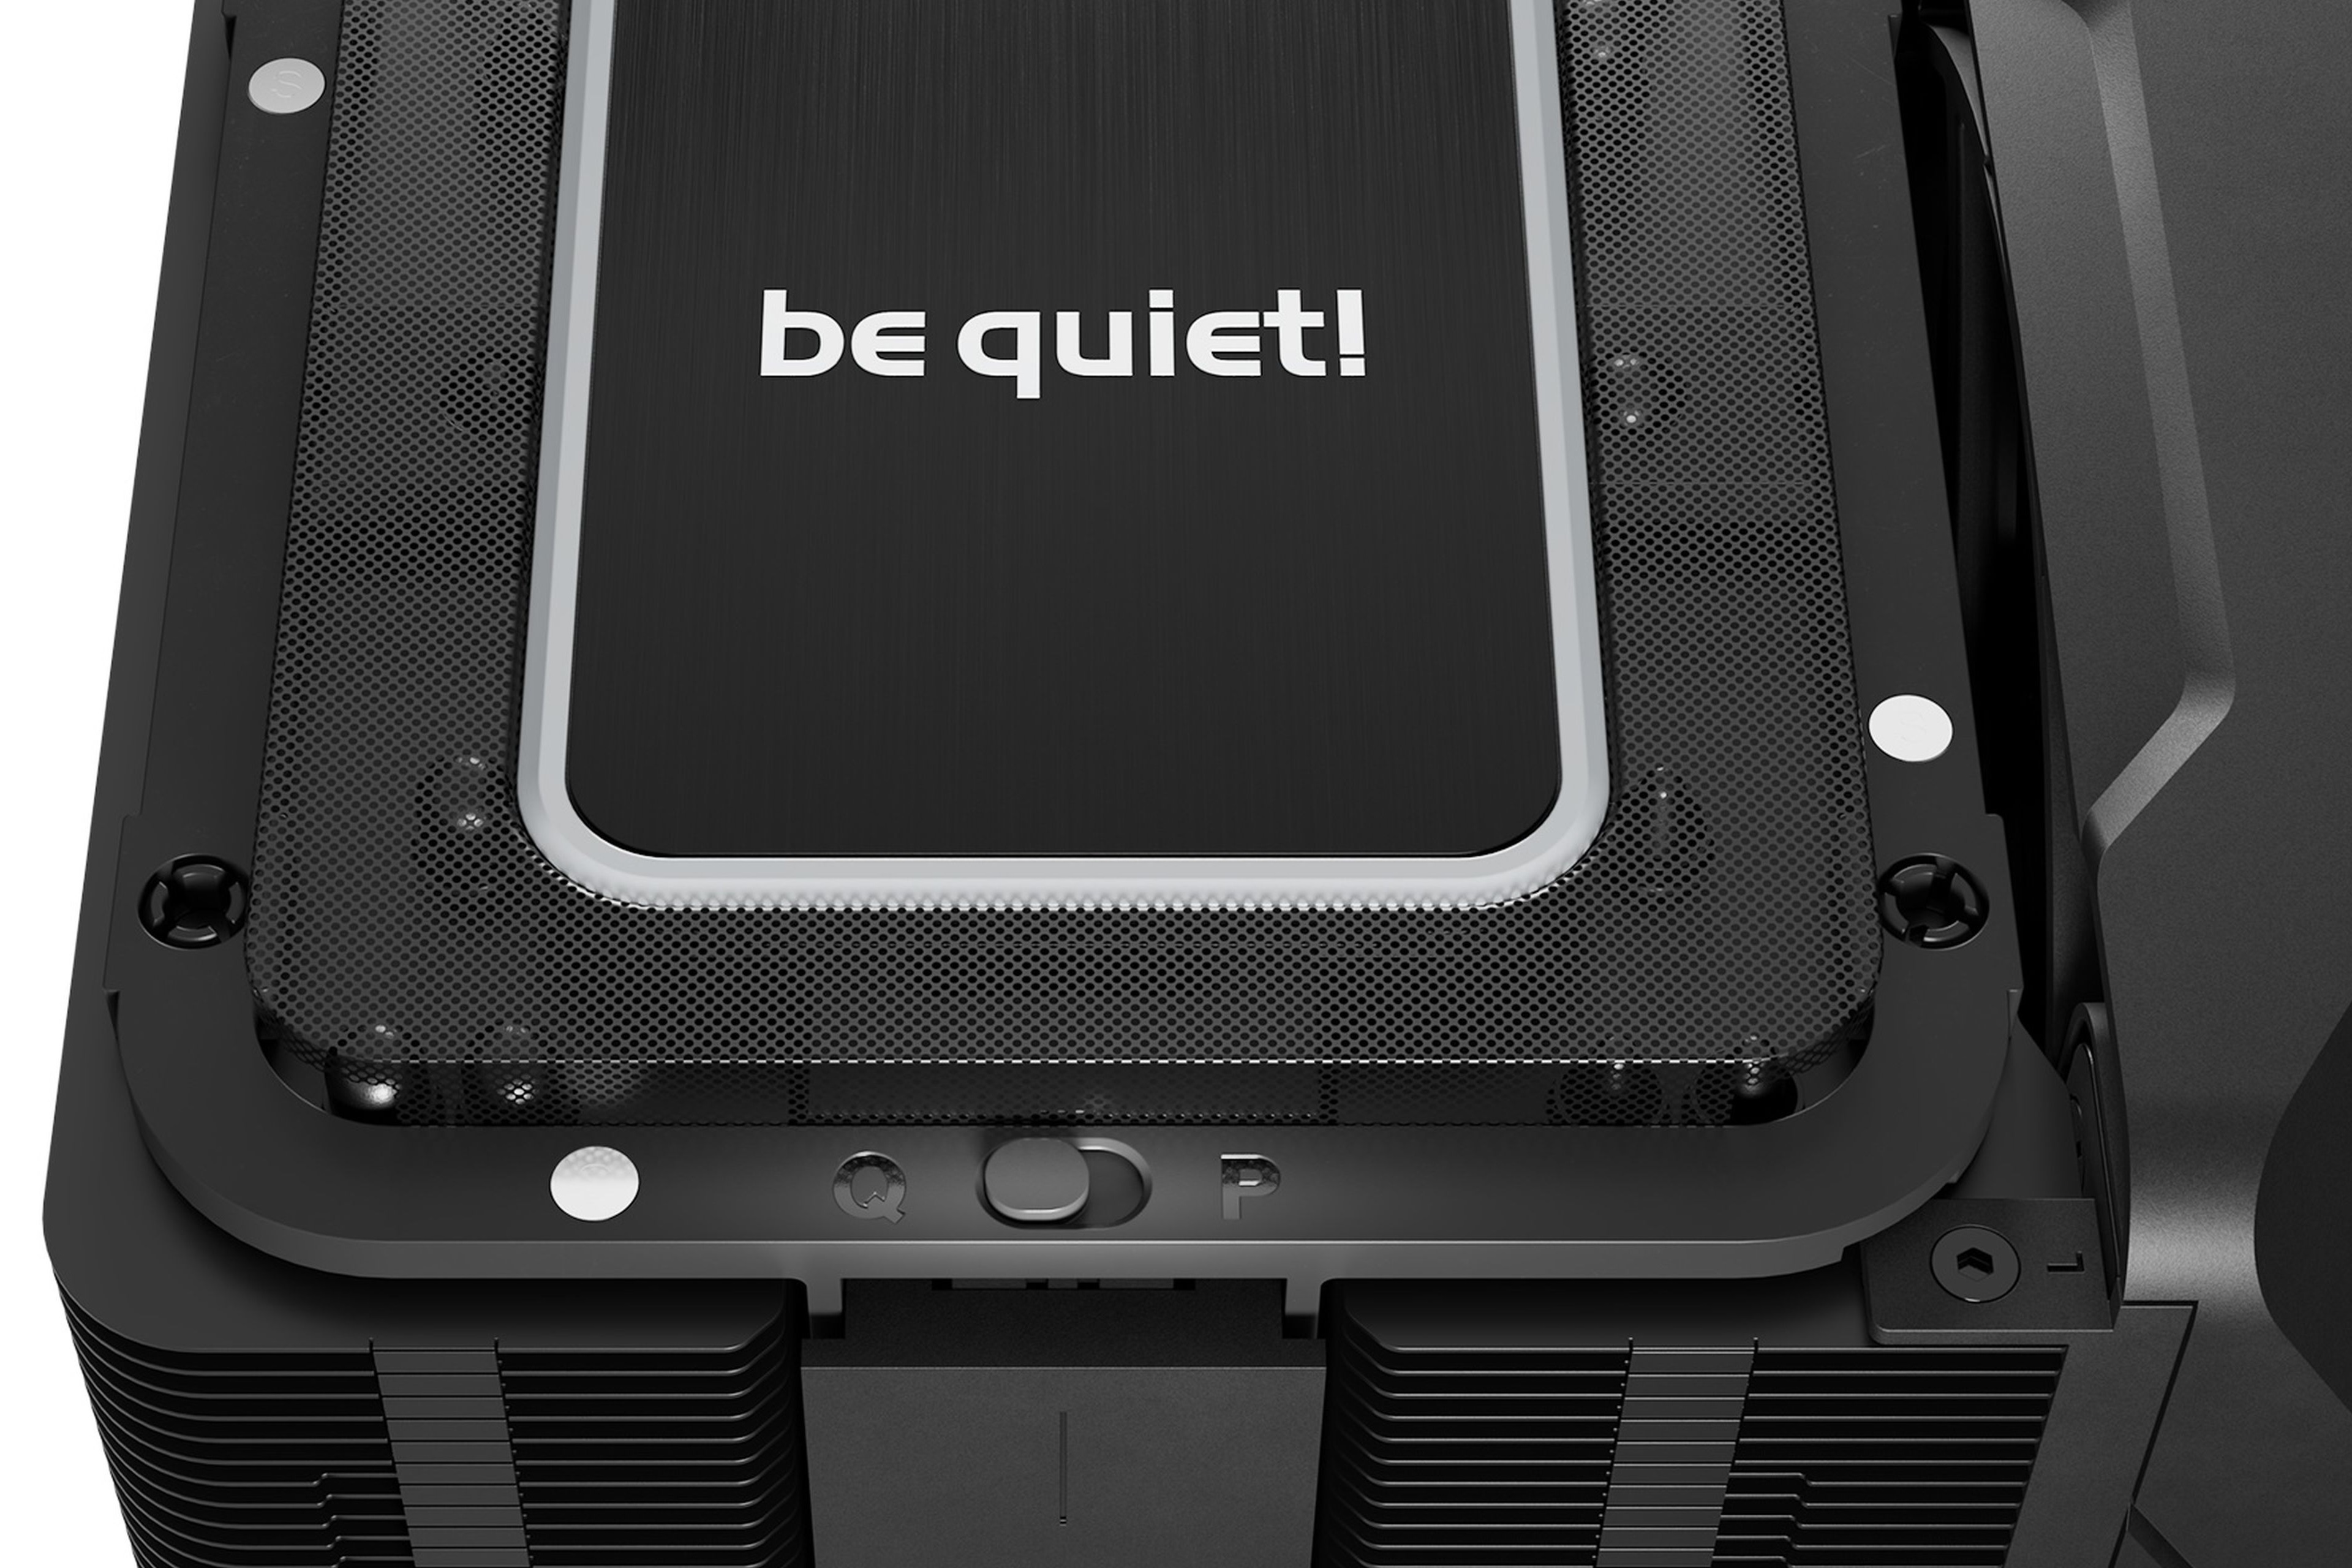 Be Quiet!'s Pure Rock Entry-Level Air Cooler Announced, Specs